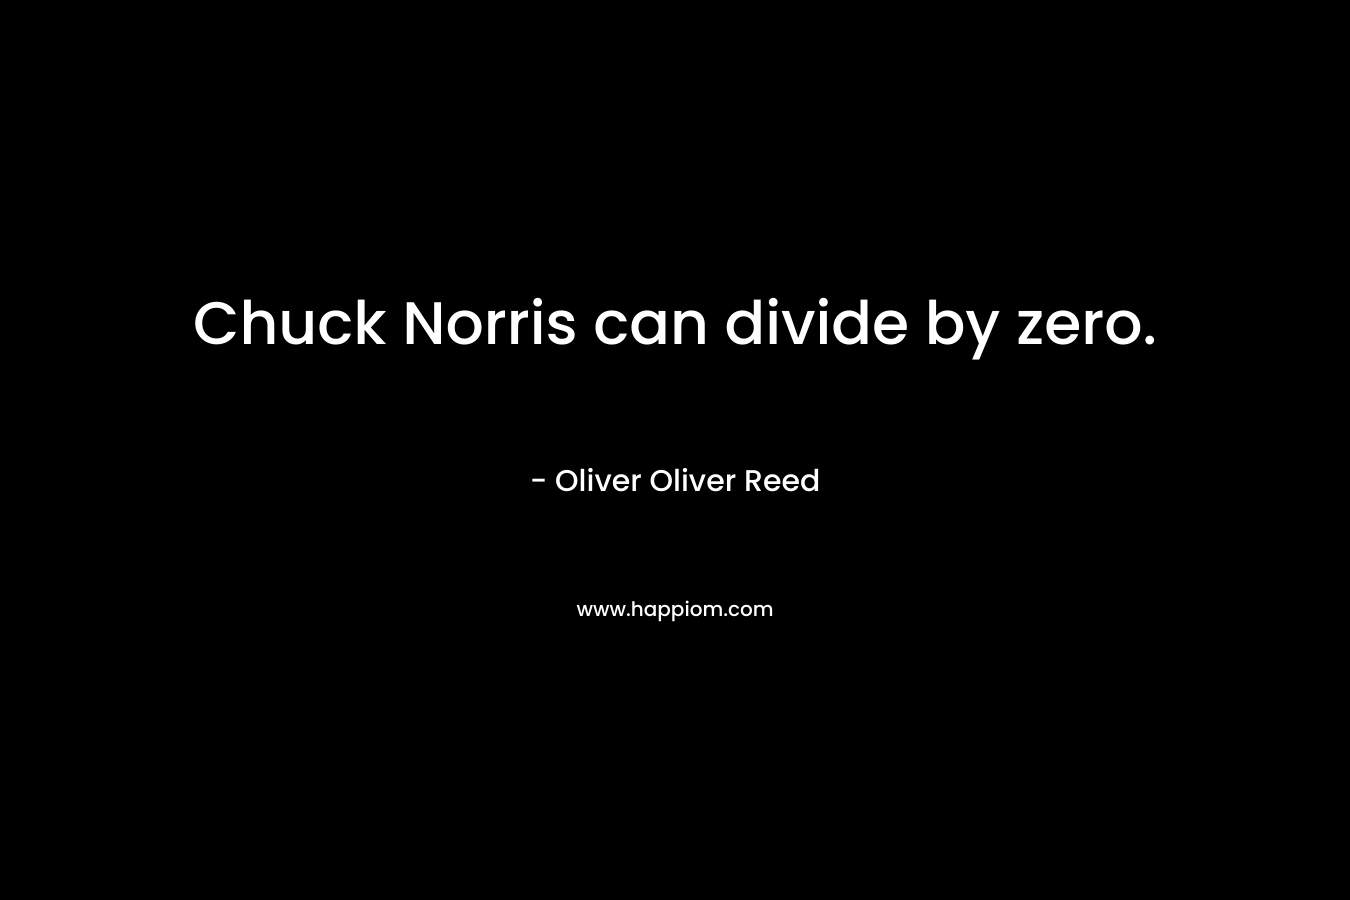 Chuck Norris can divide by zero.